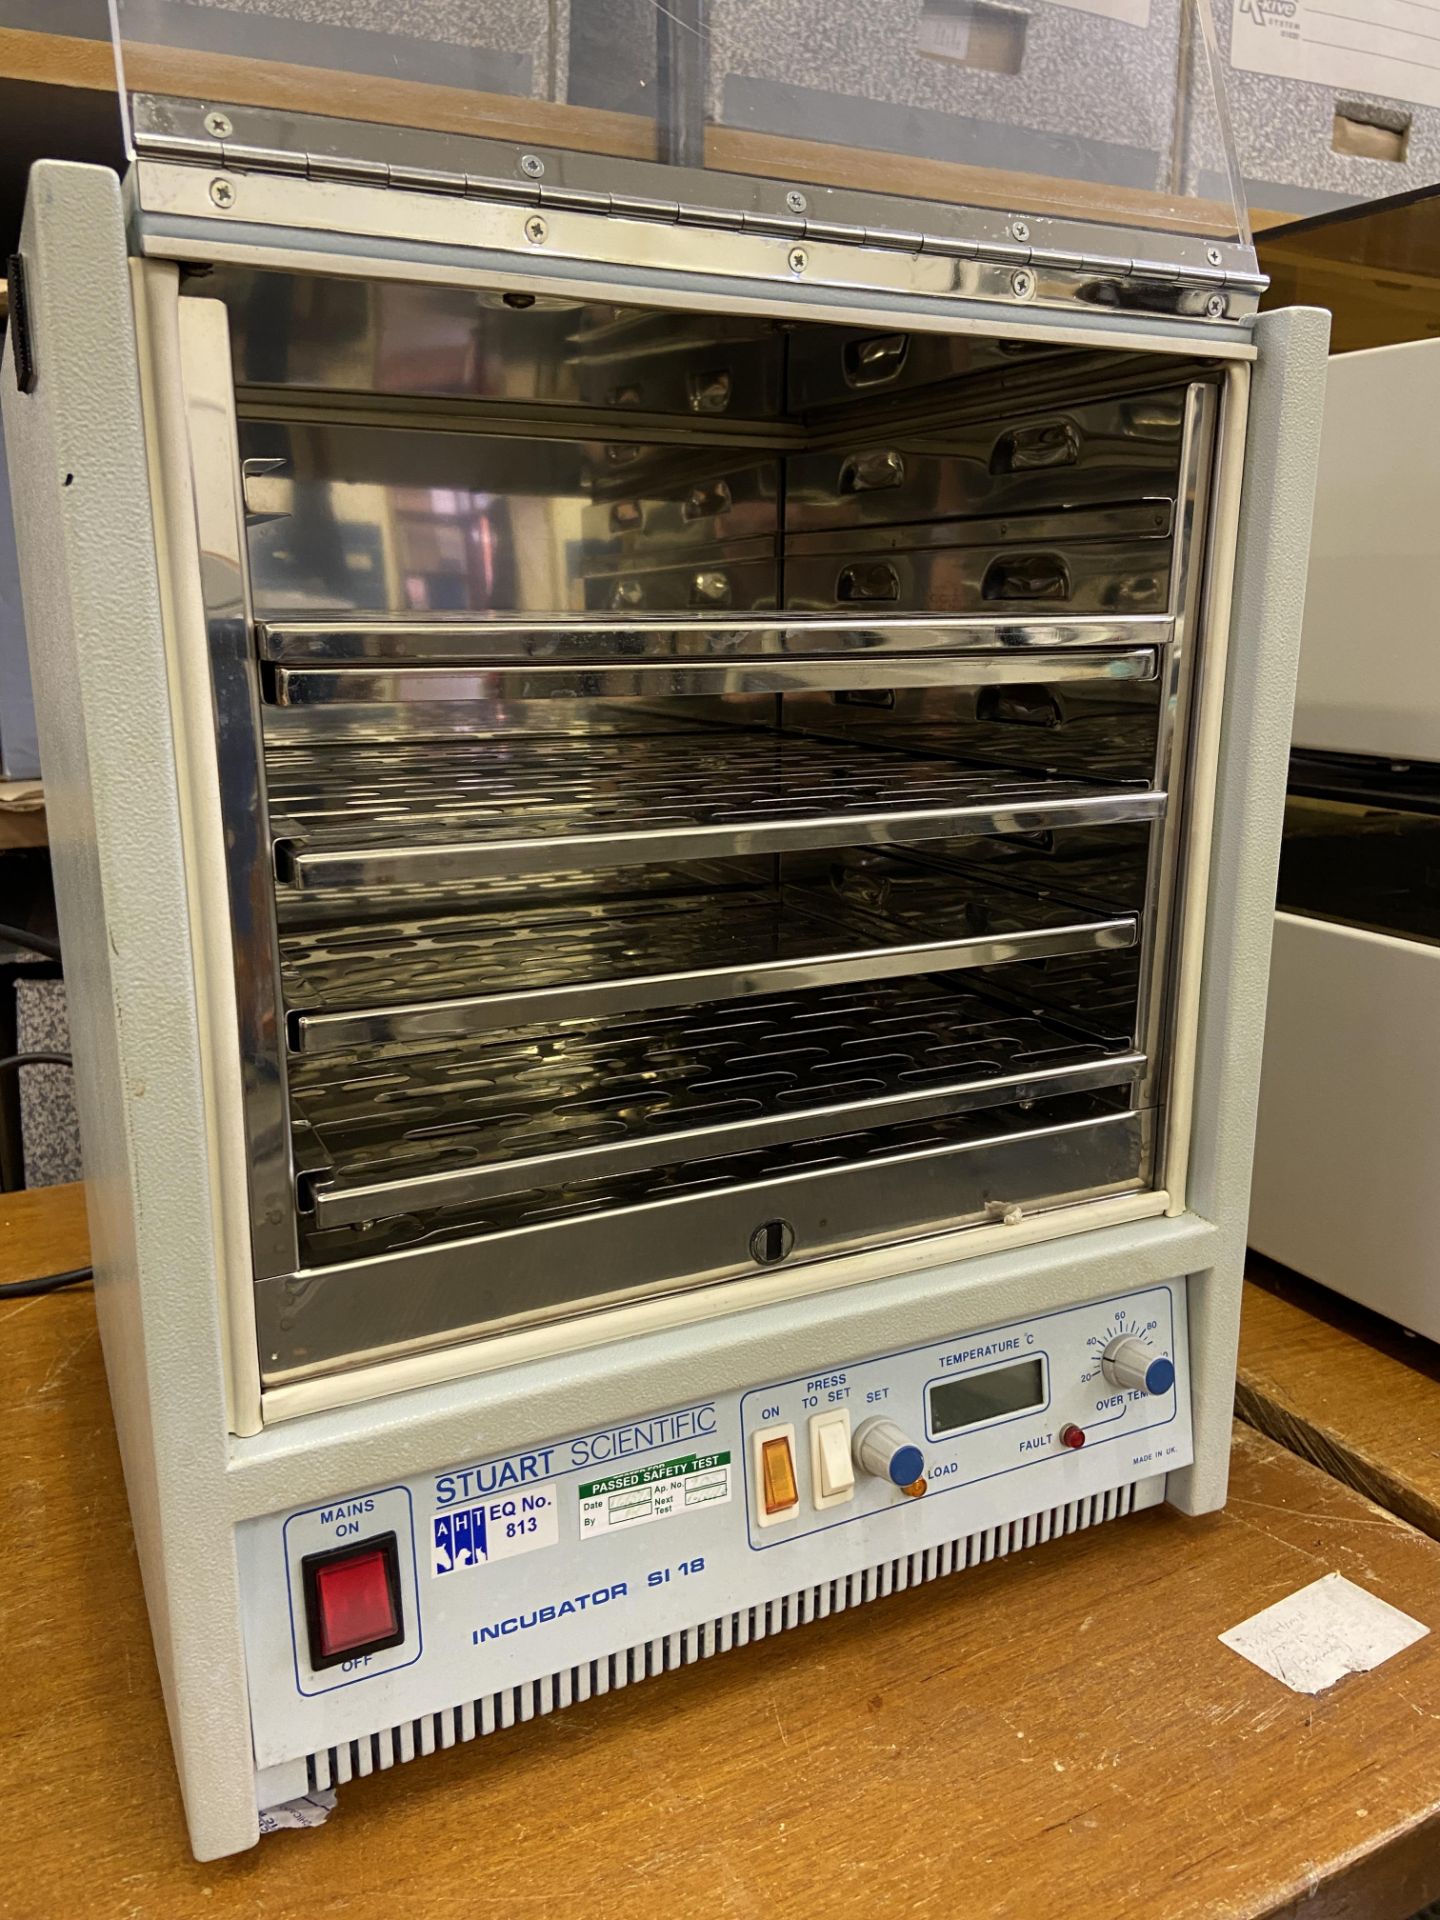 Stuart Scientific S1-18 incubator, Serial No. 5077 with 240v power cable - Image 2 of 3